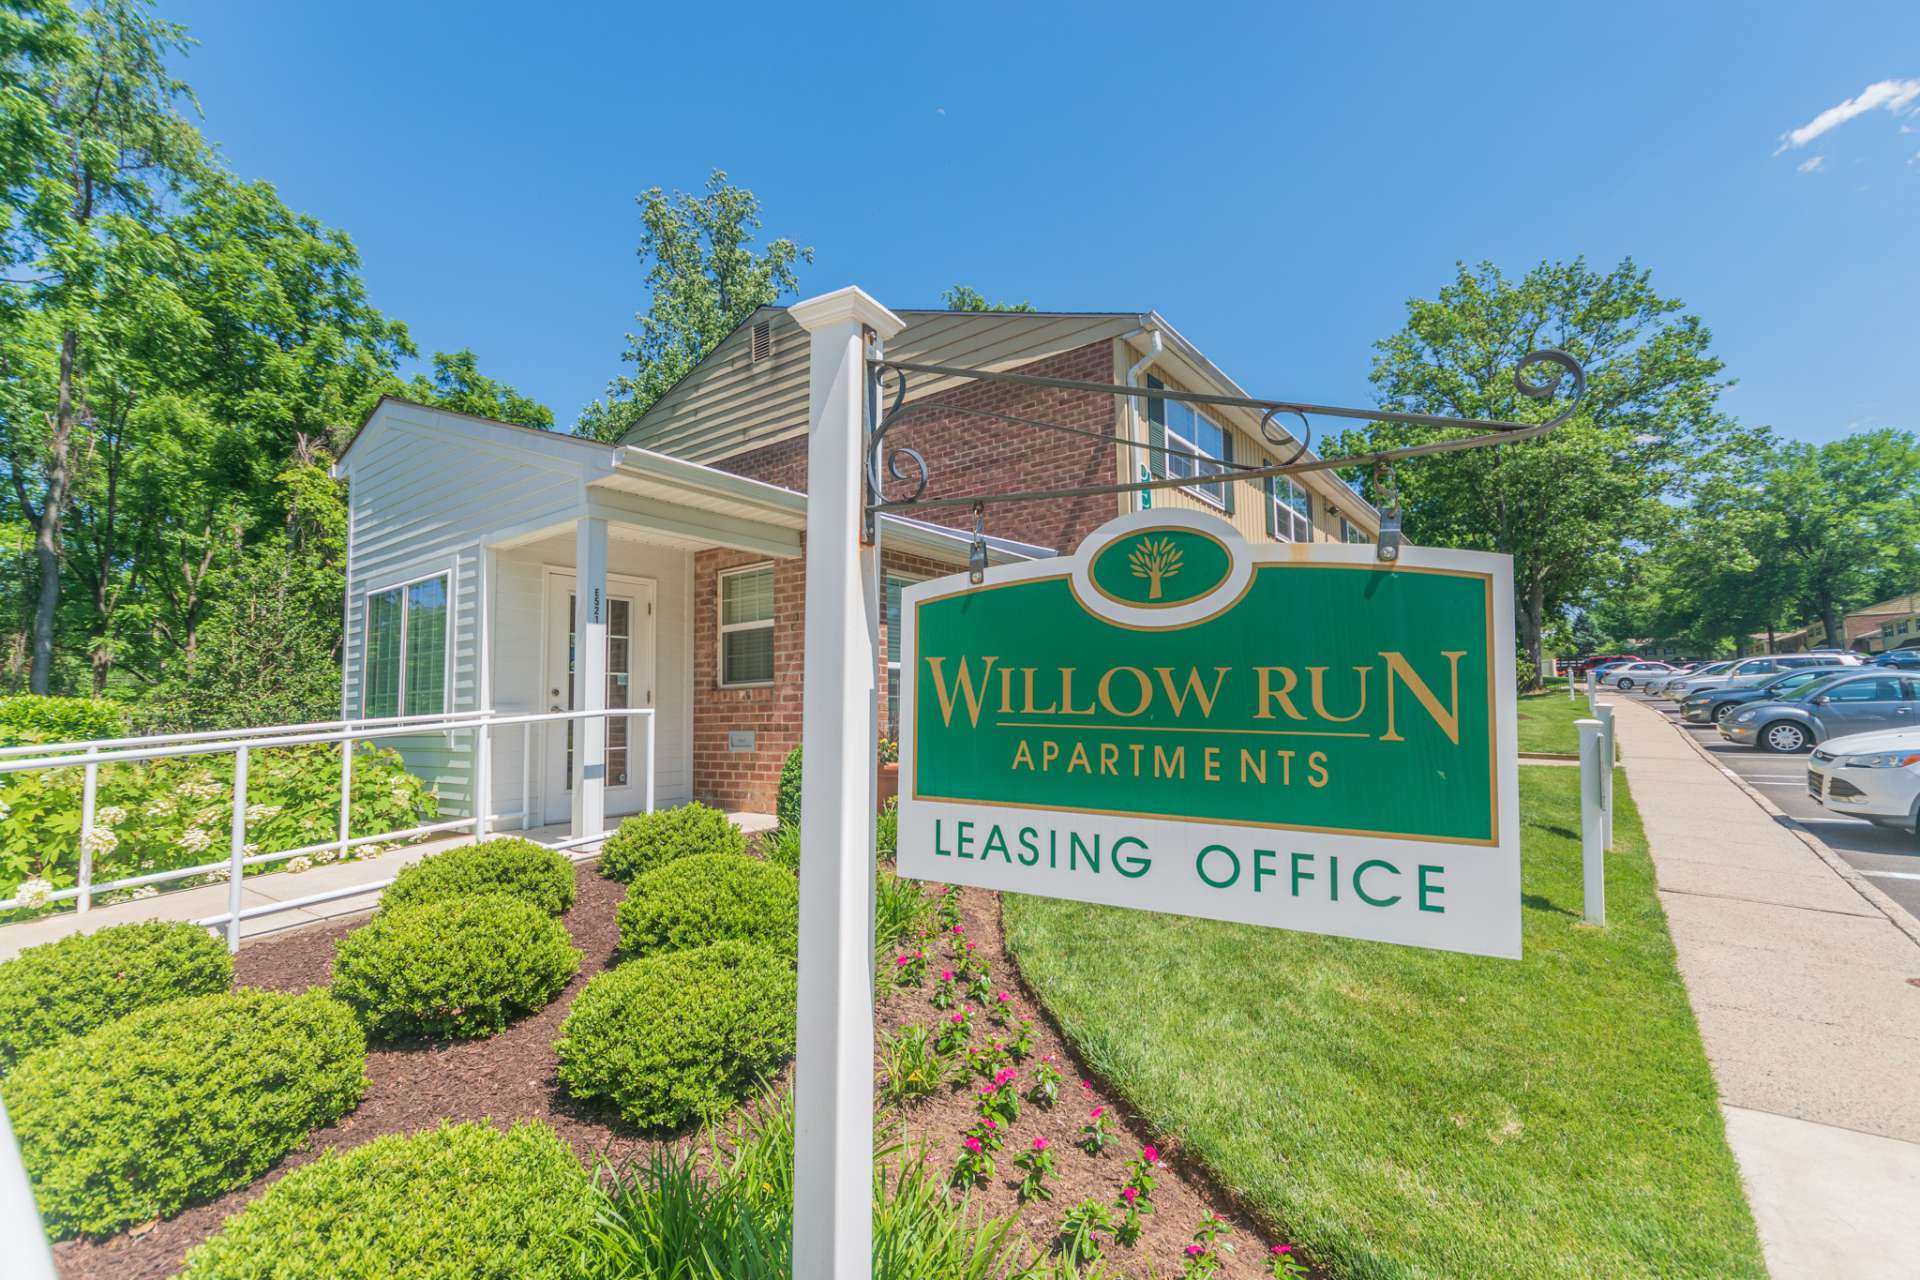 Willow Run Apartments leasing office sign